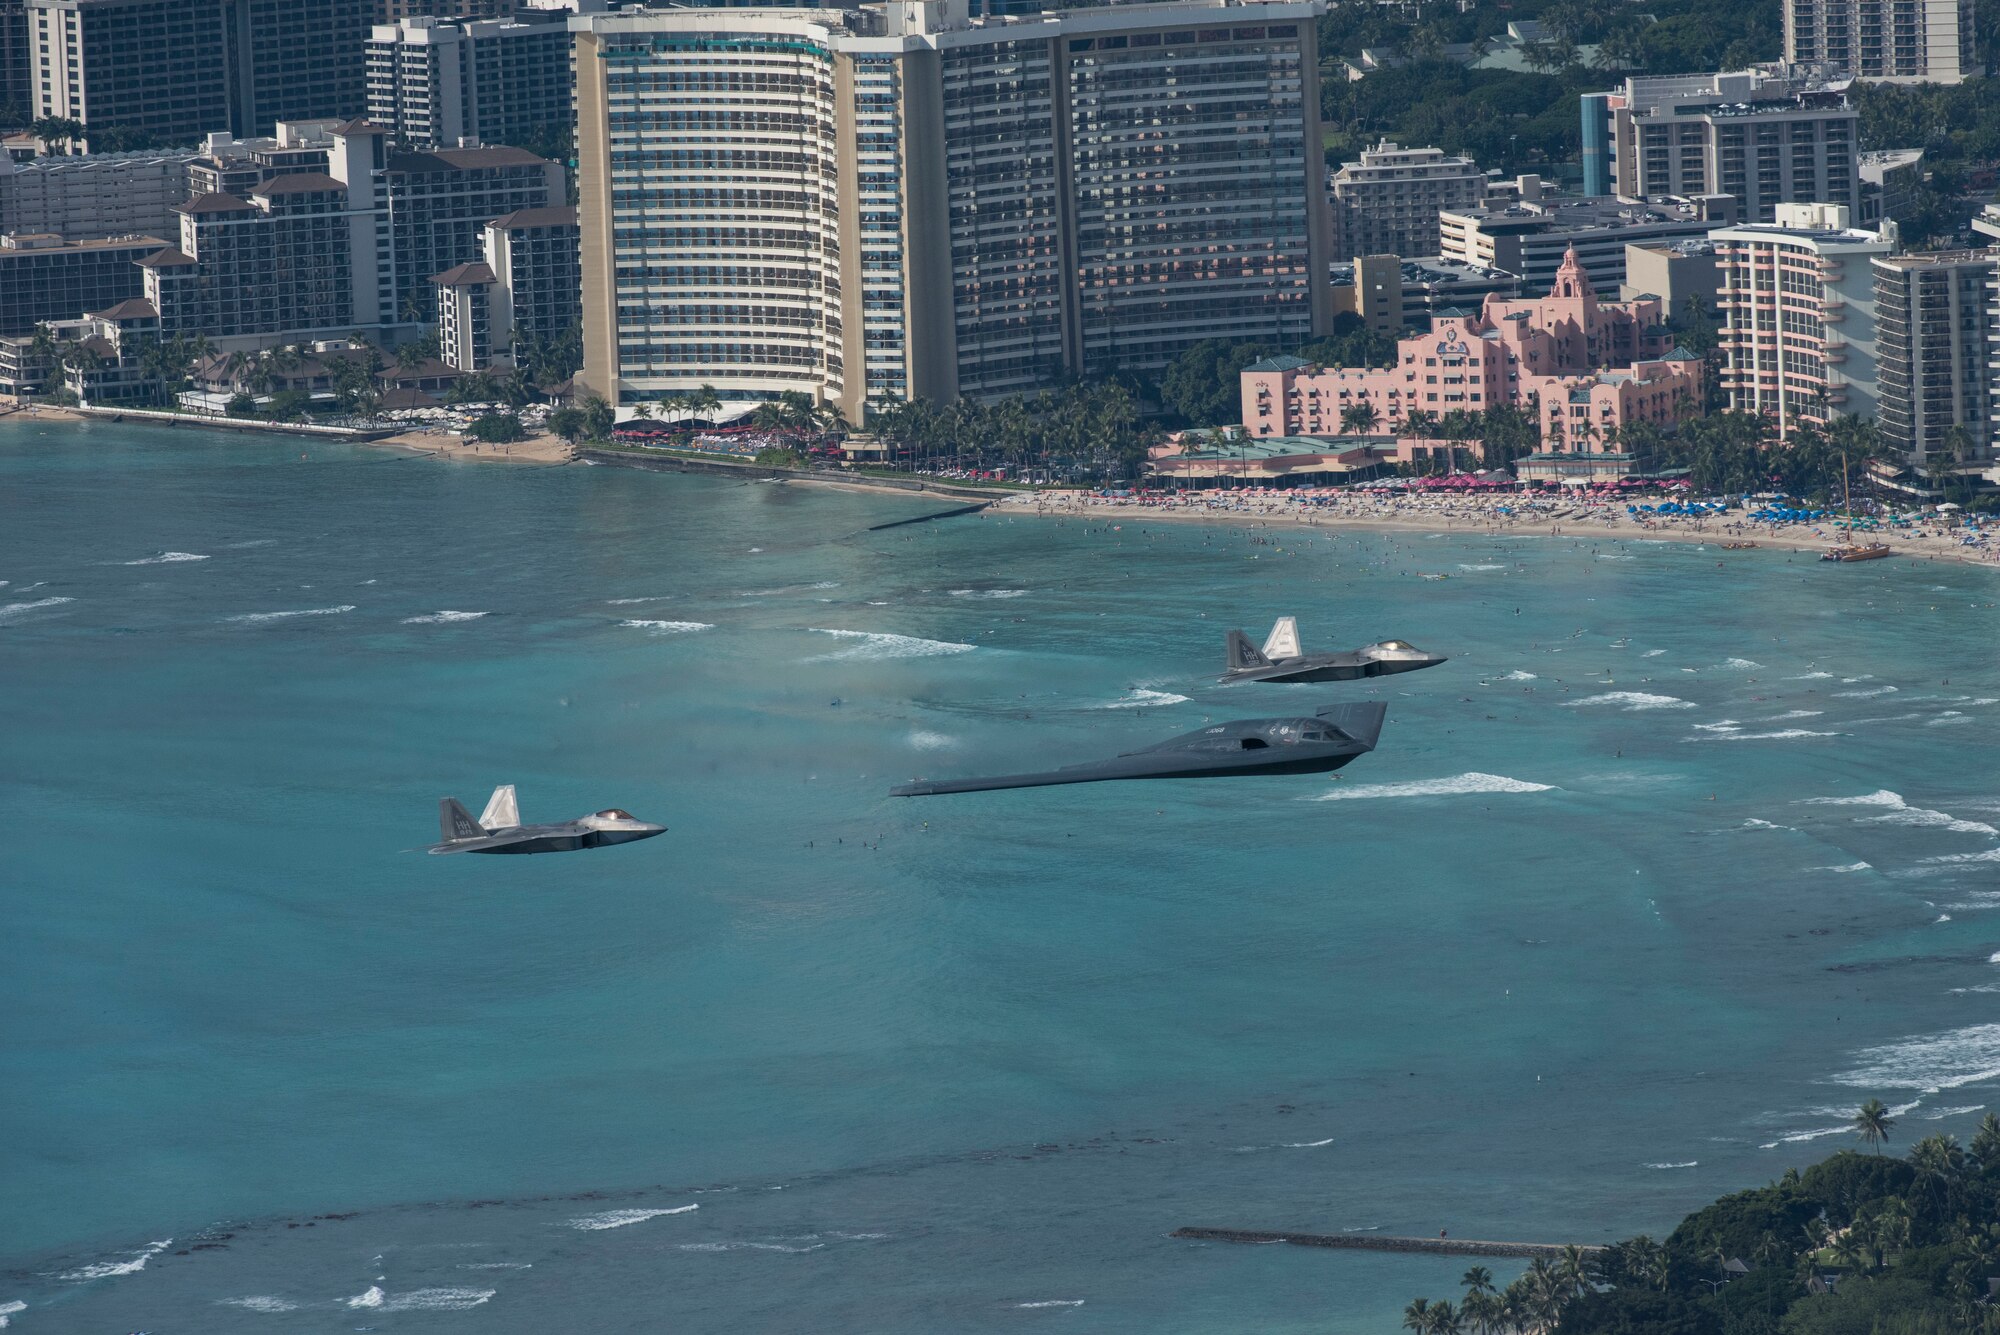 A U.S. Air Force B-2 Spirit bomber deployed from Whiteman Air Force Base, Missouri, and two F-22 Raptors from the 199th Fighter Squadron at Joint Base Pearl Harbor-Hickam, Hawaii, fly in formation near Diamond Head State Monument, Hawaii, after completing interoperability training, Jan. 15, 2019.